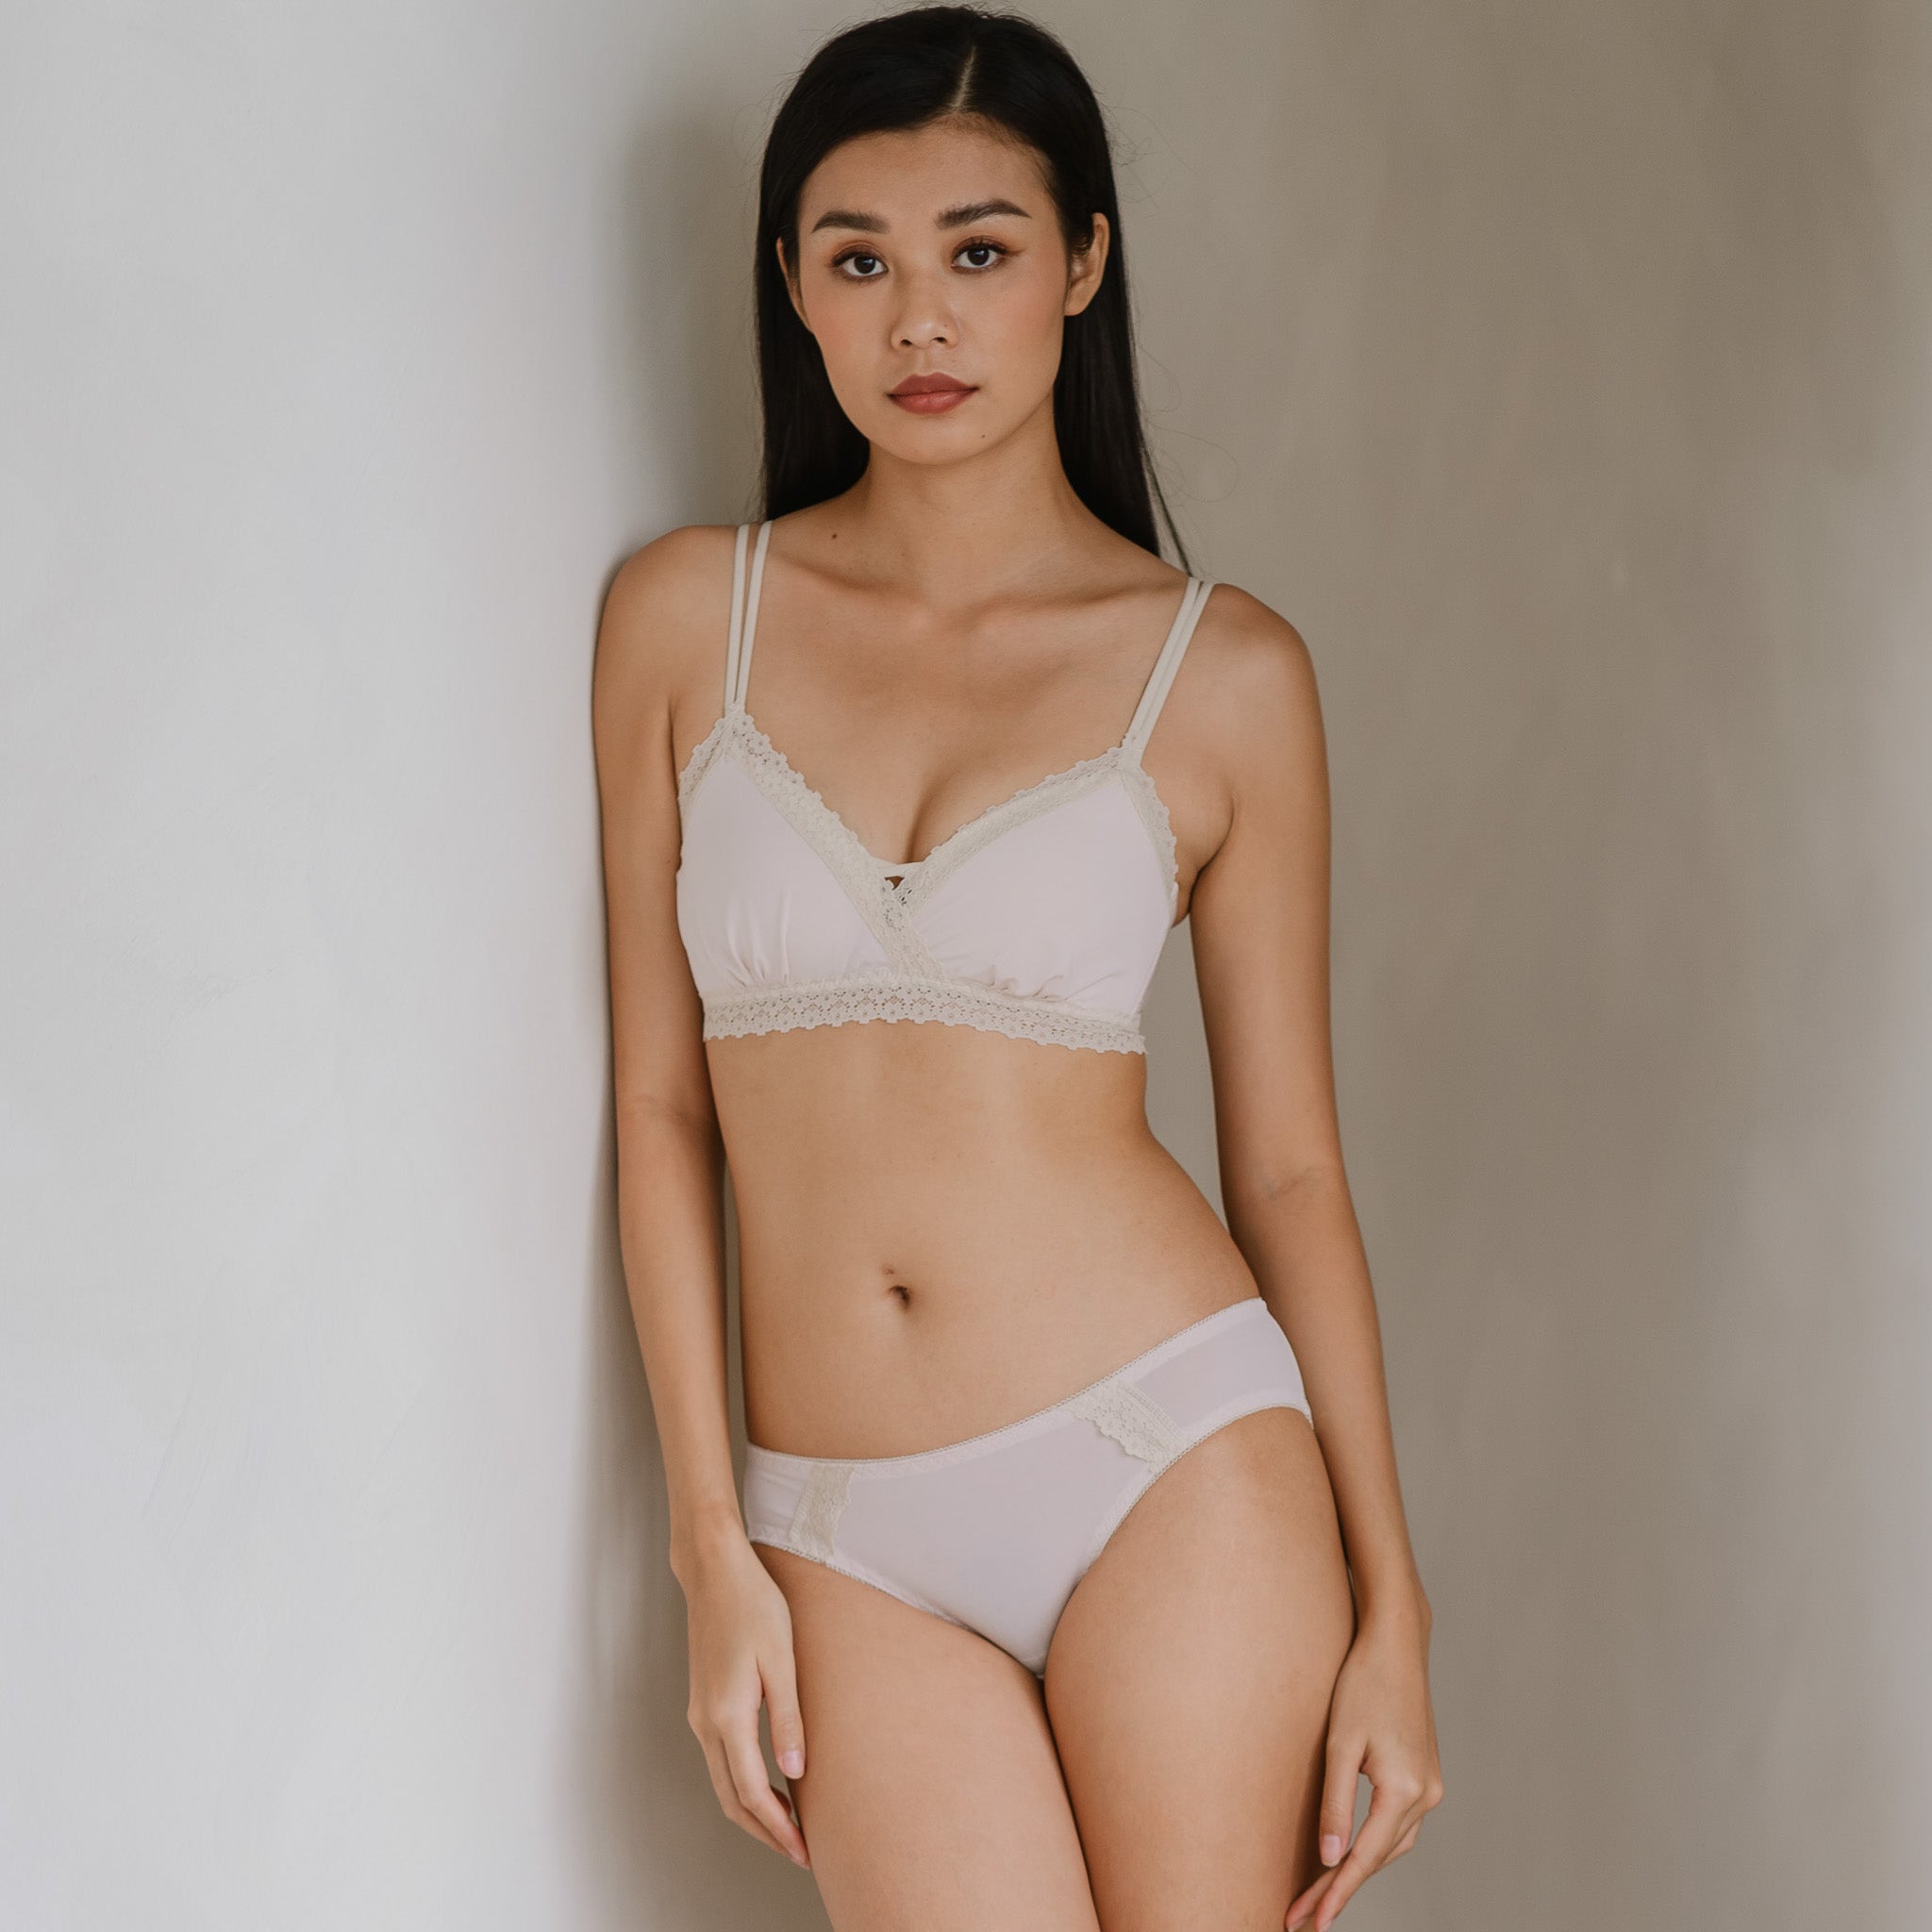 The Silky Smooth! Lace Trim Lightly-Lined Wireless Bra in Mochi Crepe